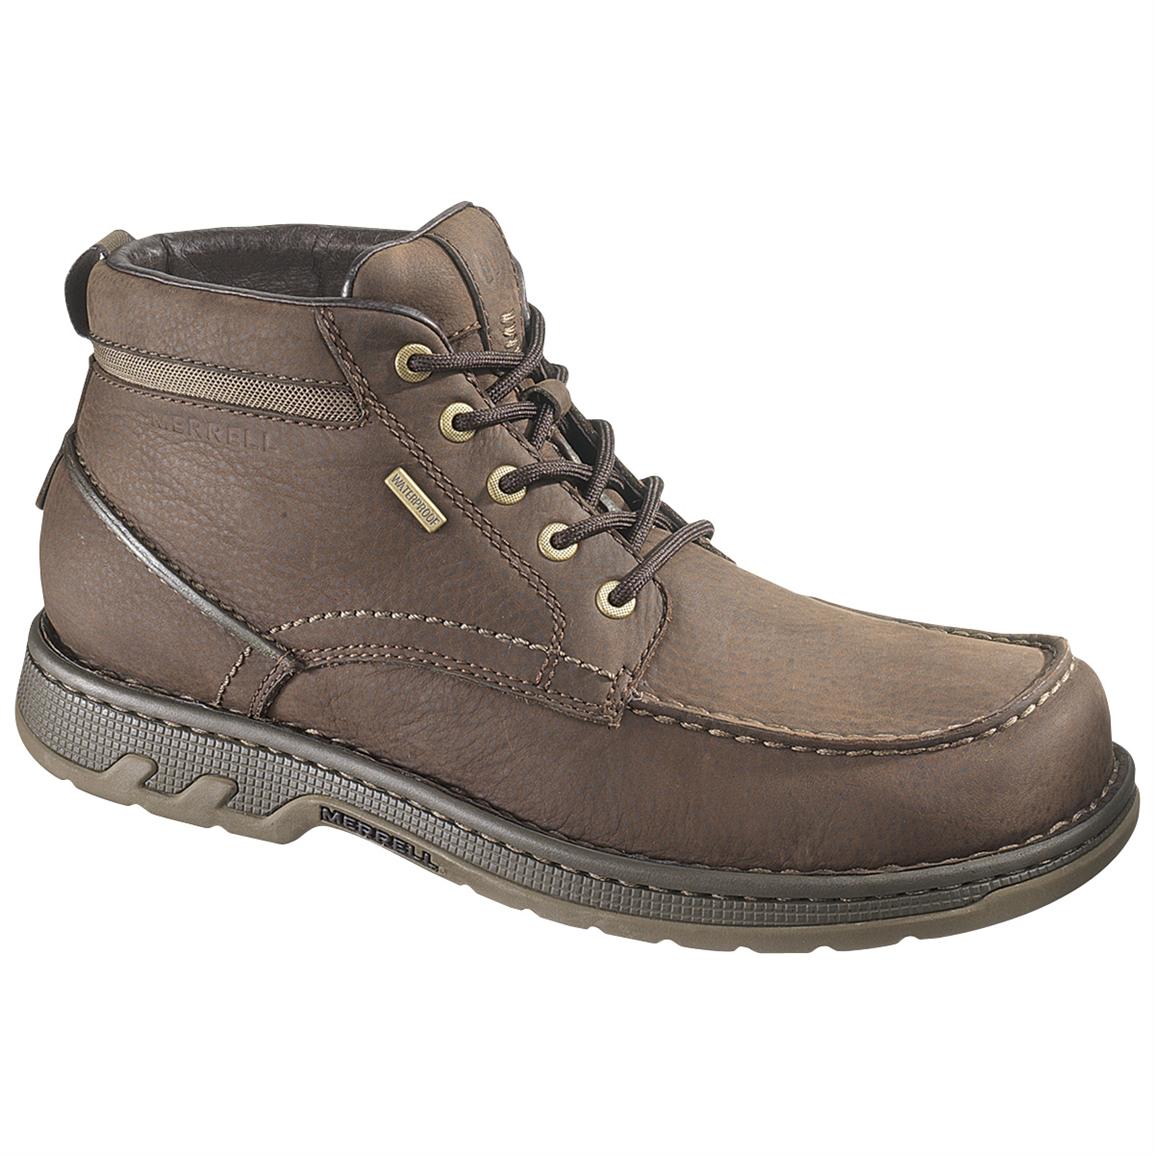 WATERPROOF Merrell® World Guide Boots - 211922, Casual Shoes at ...